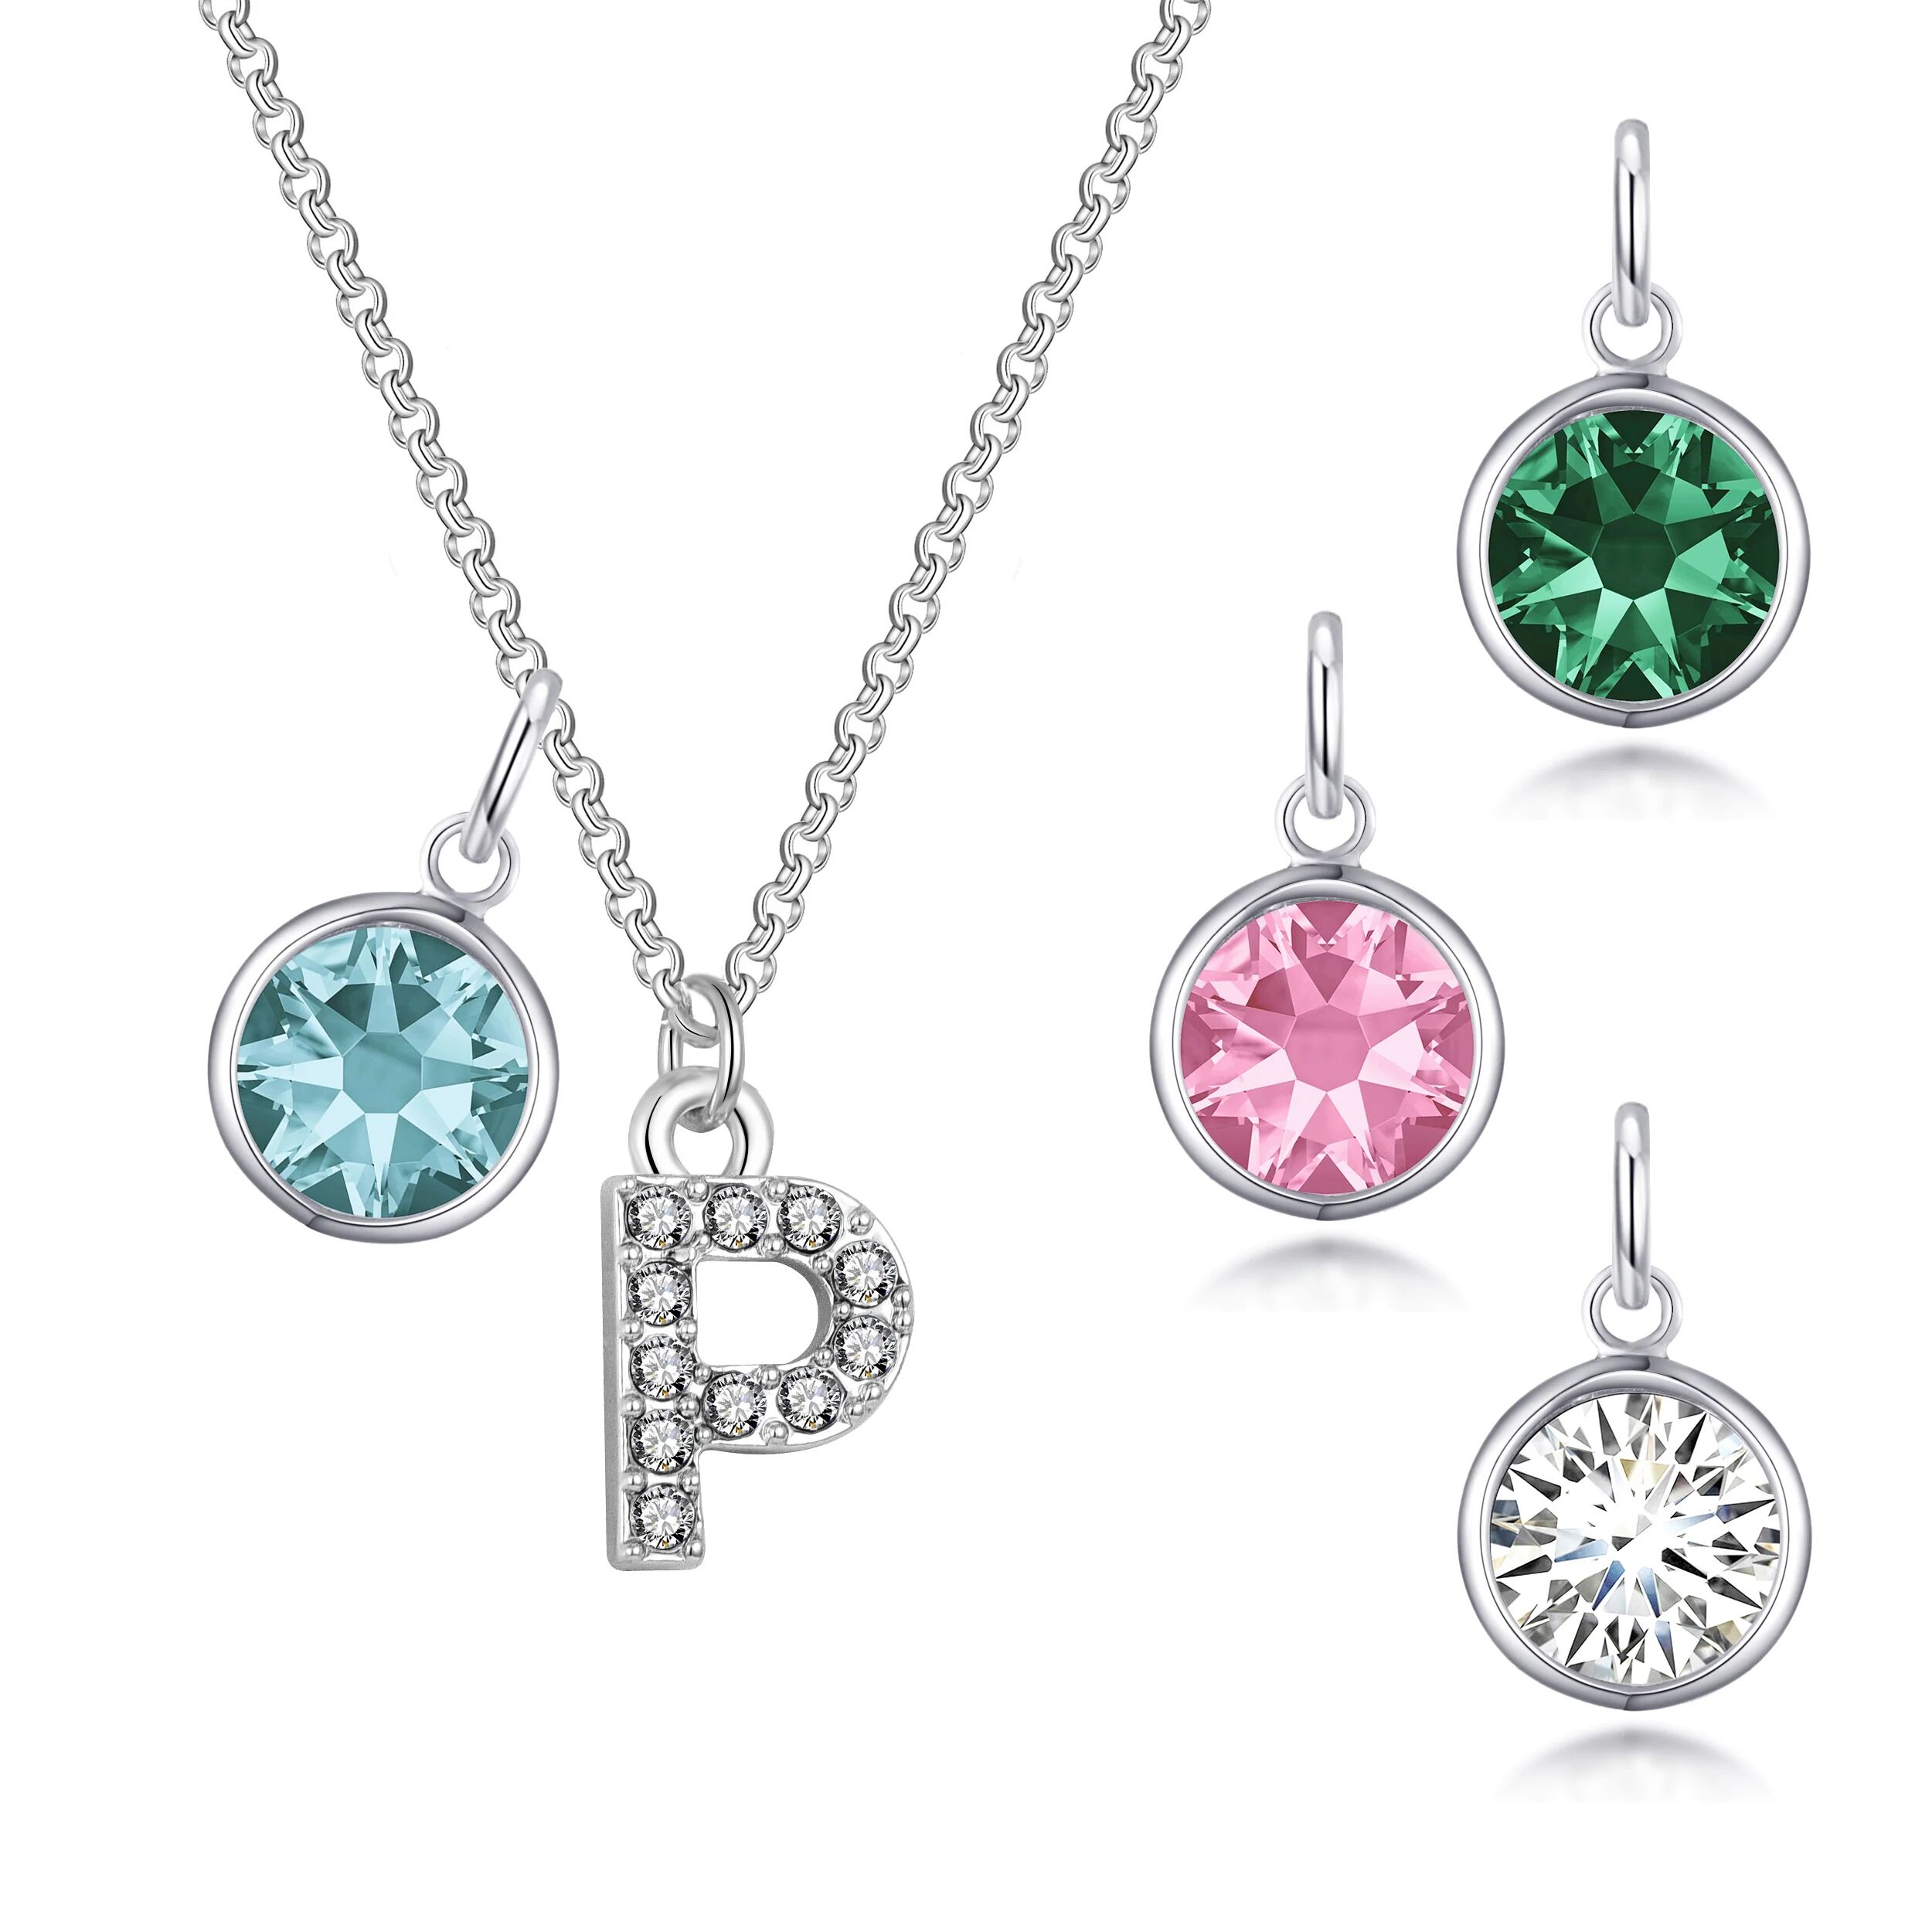 Philip Jones Jewellery Pave Initial P Necklace with Birthstone Charm Created with Zircondia® Crystals